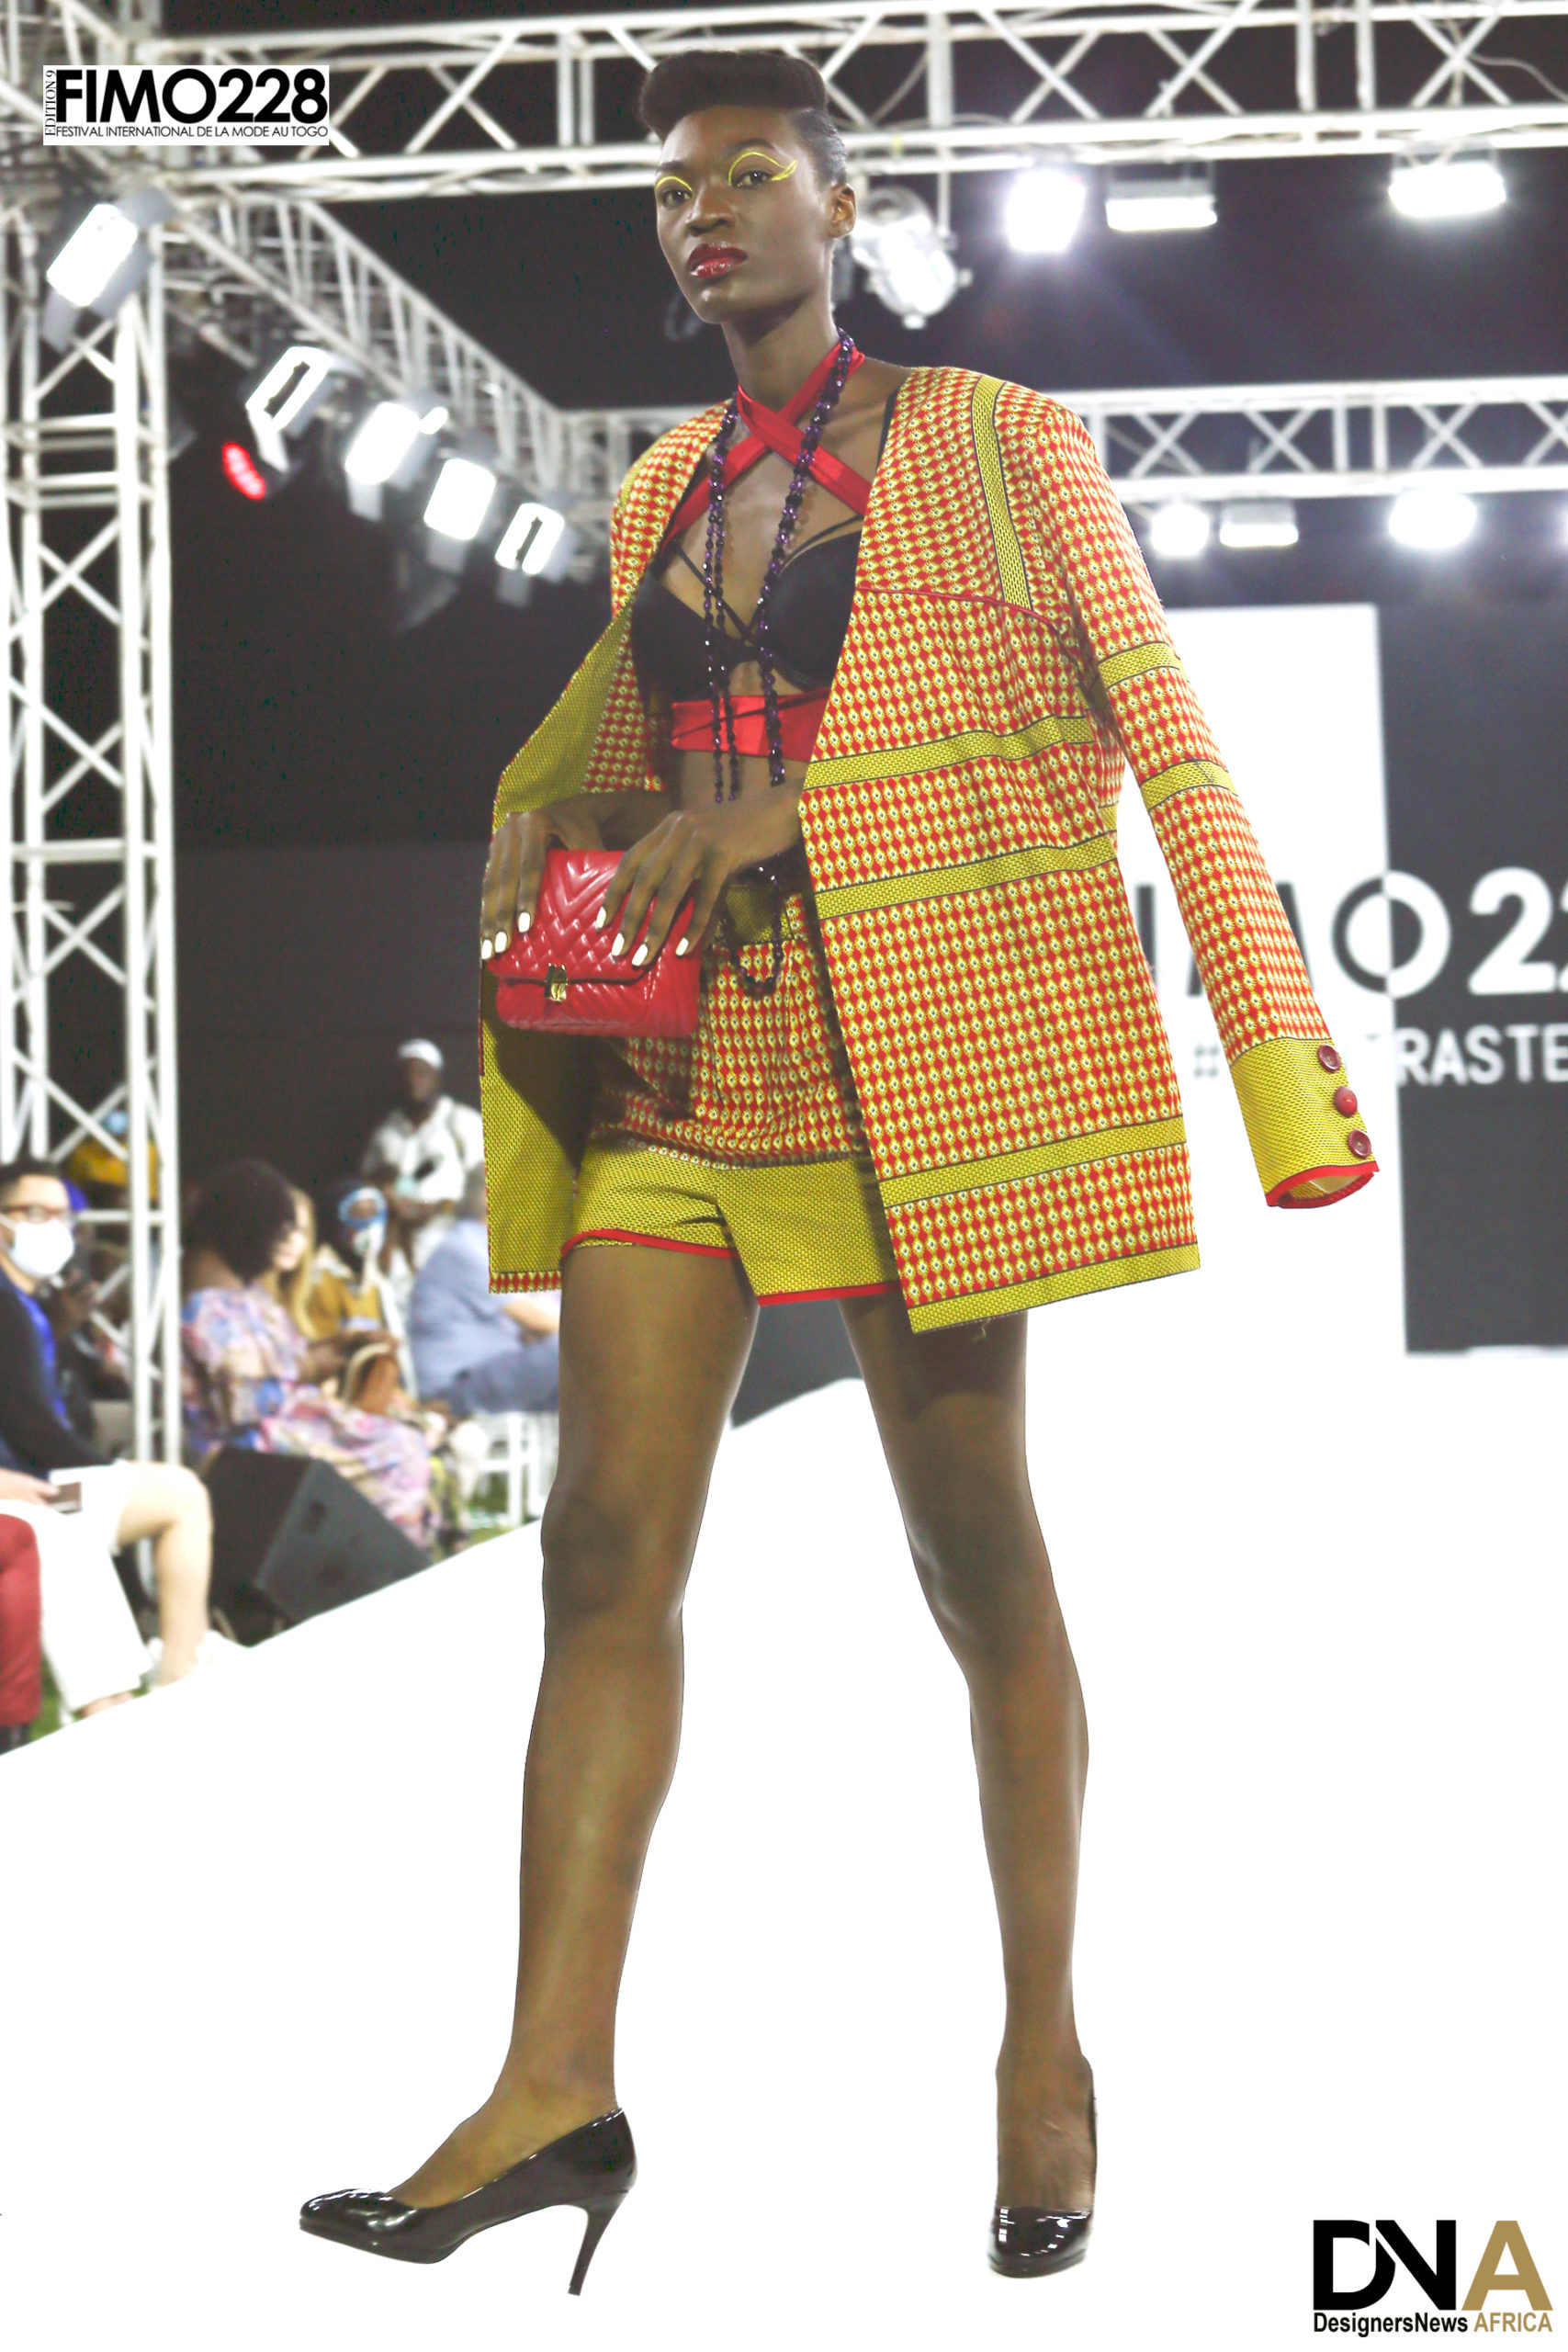 BEST AFRICAN FASHION MAGAZINE-FIMO-228-EDITION-9-2022-DEFILE-CLASSIQUE-DESIGNER-THE-MAN-Michelle-Ange-NACTO-DN-AFRICA-DNA-INTERNATIONAL-MEDIA-PARTNER-MD0A0243